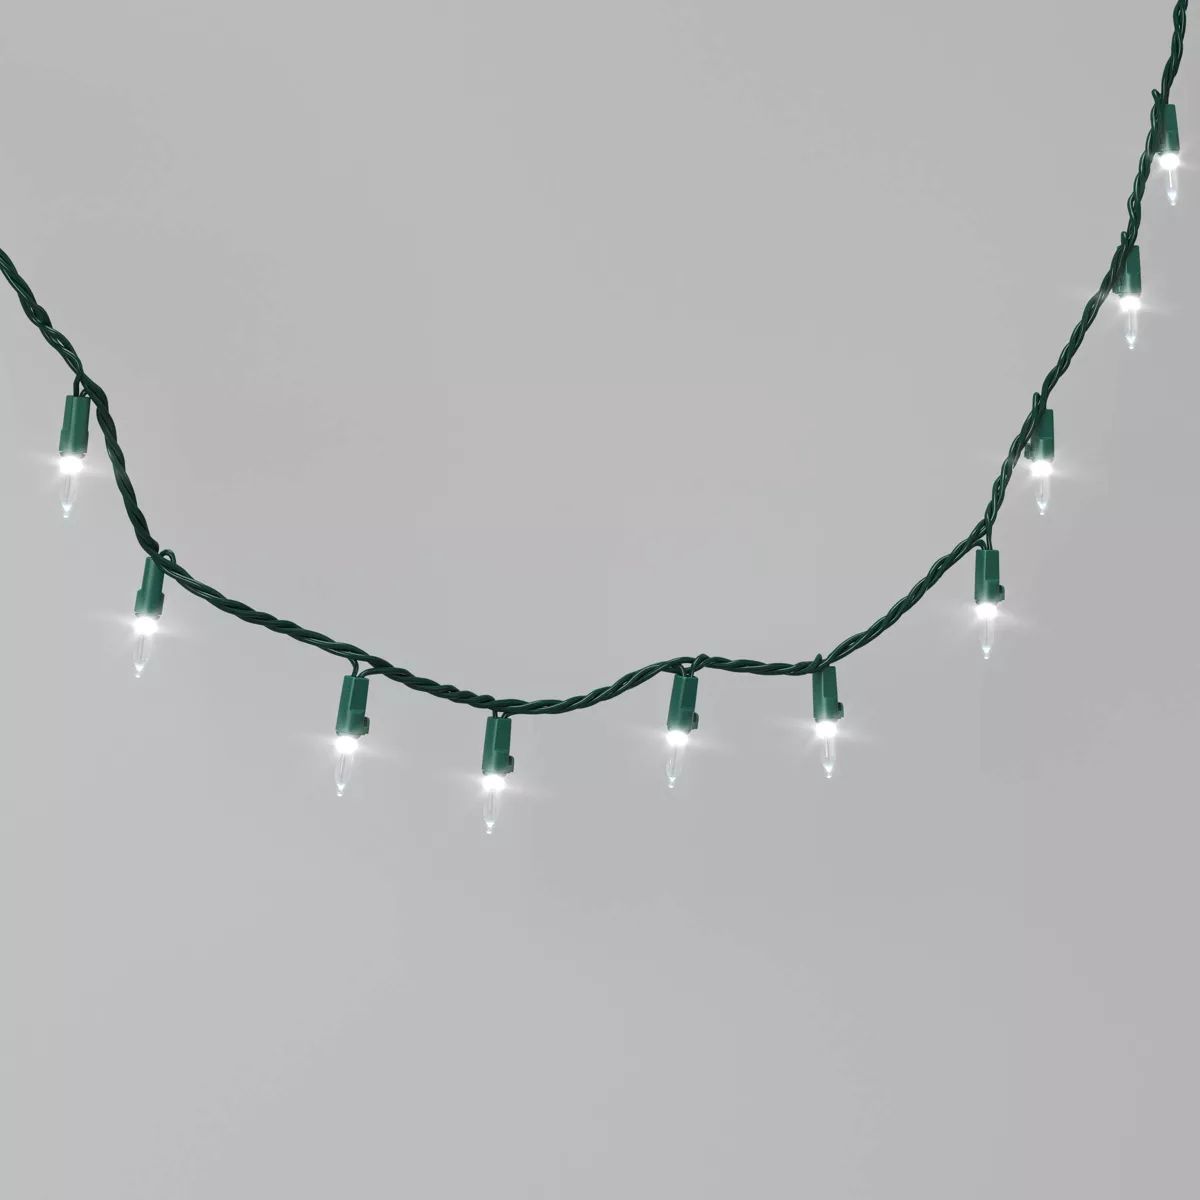 100ct LED Smooth Mini Christmas String Lights with Green Wire - Wondershop™ | Target